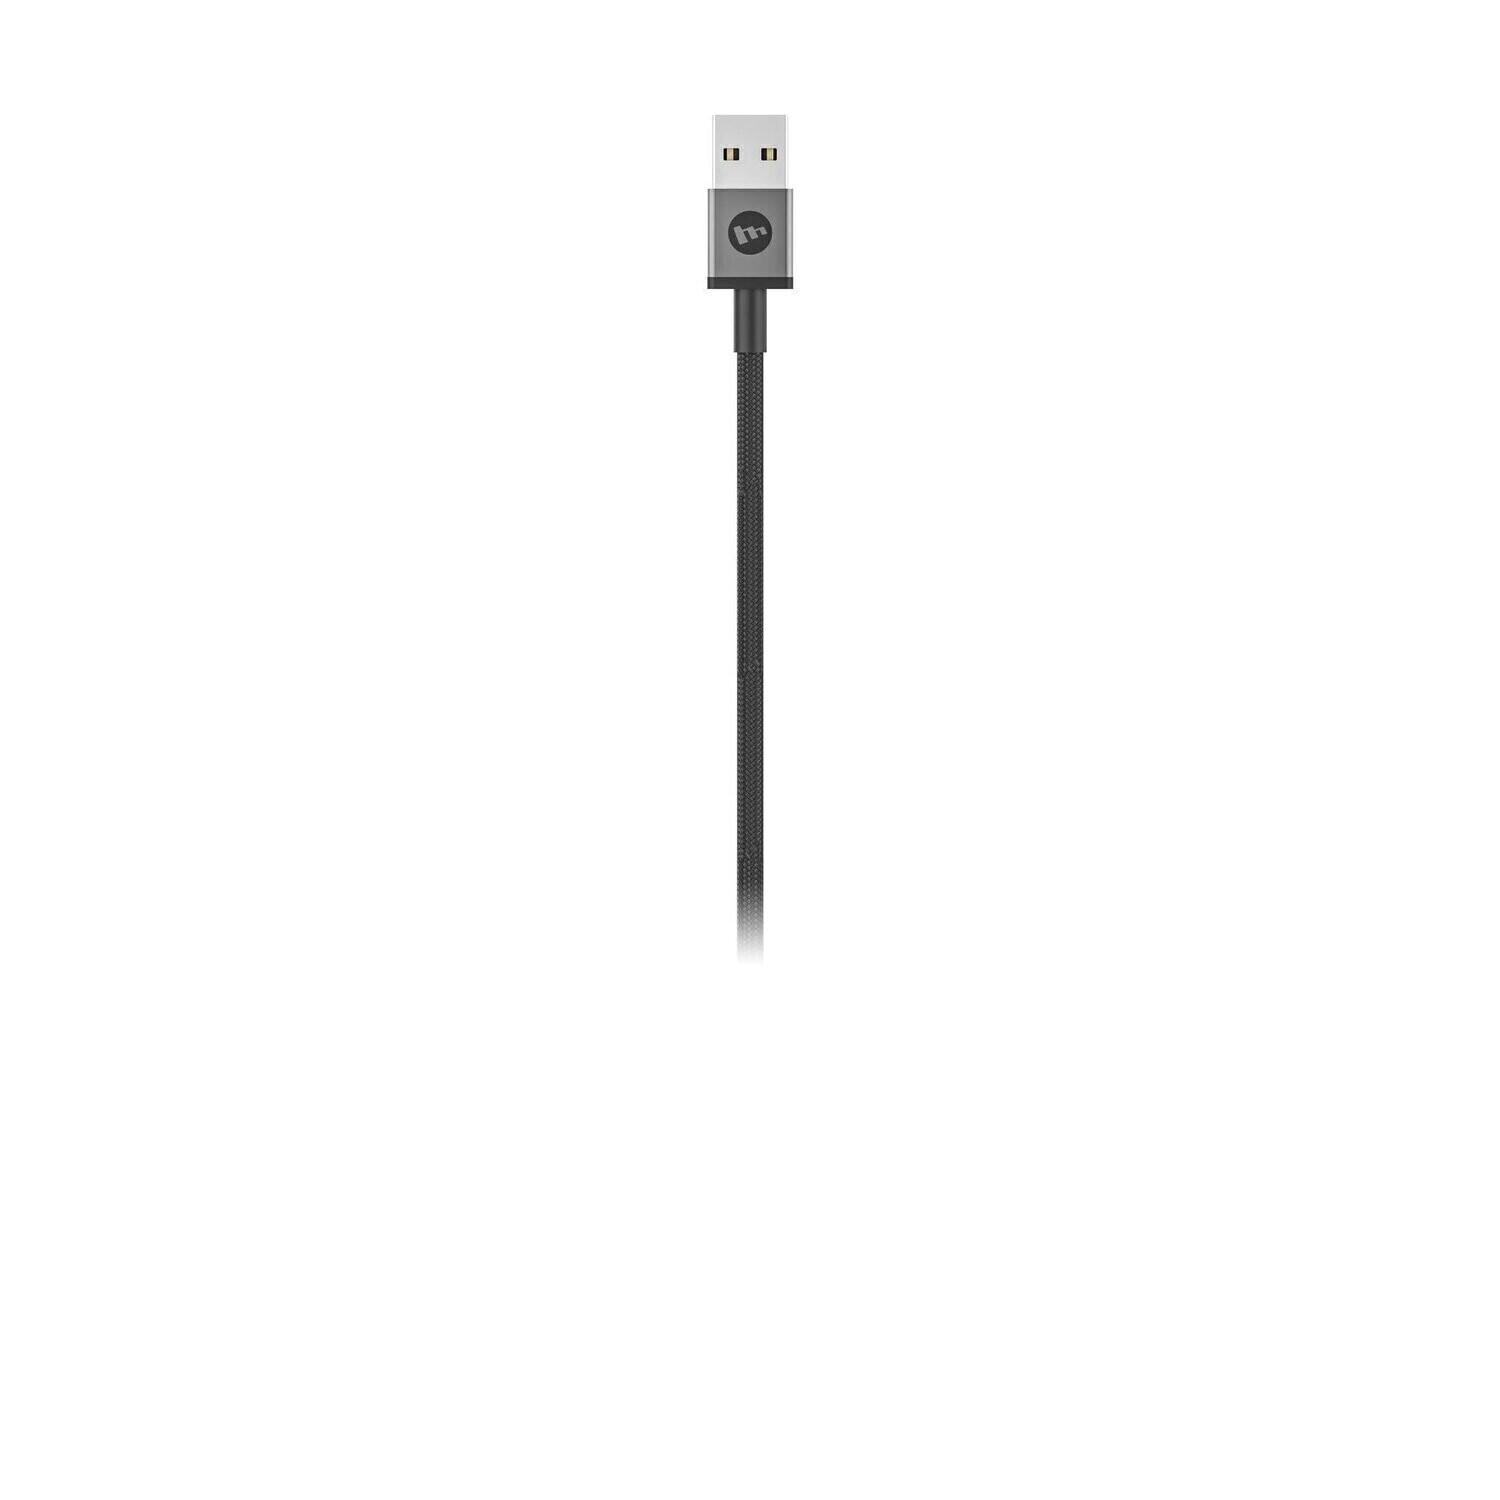 Mophie Cable USB-A to USB-C (1 Meter), Black